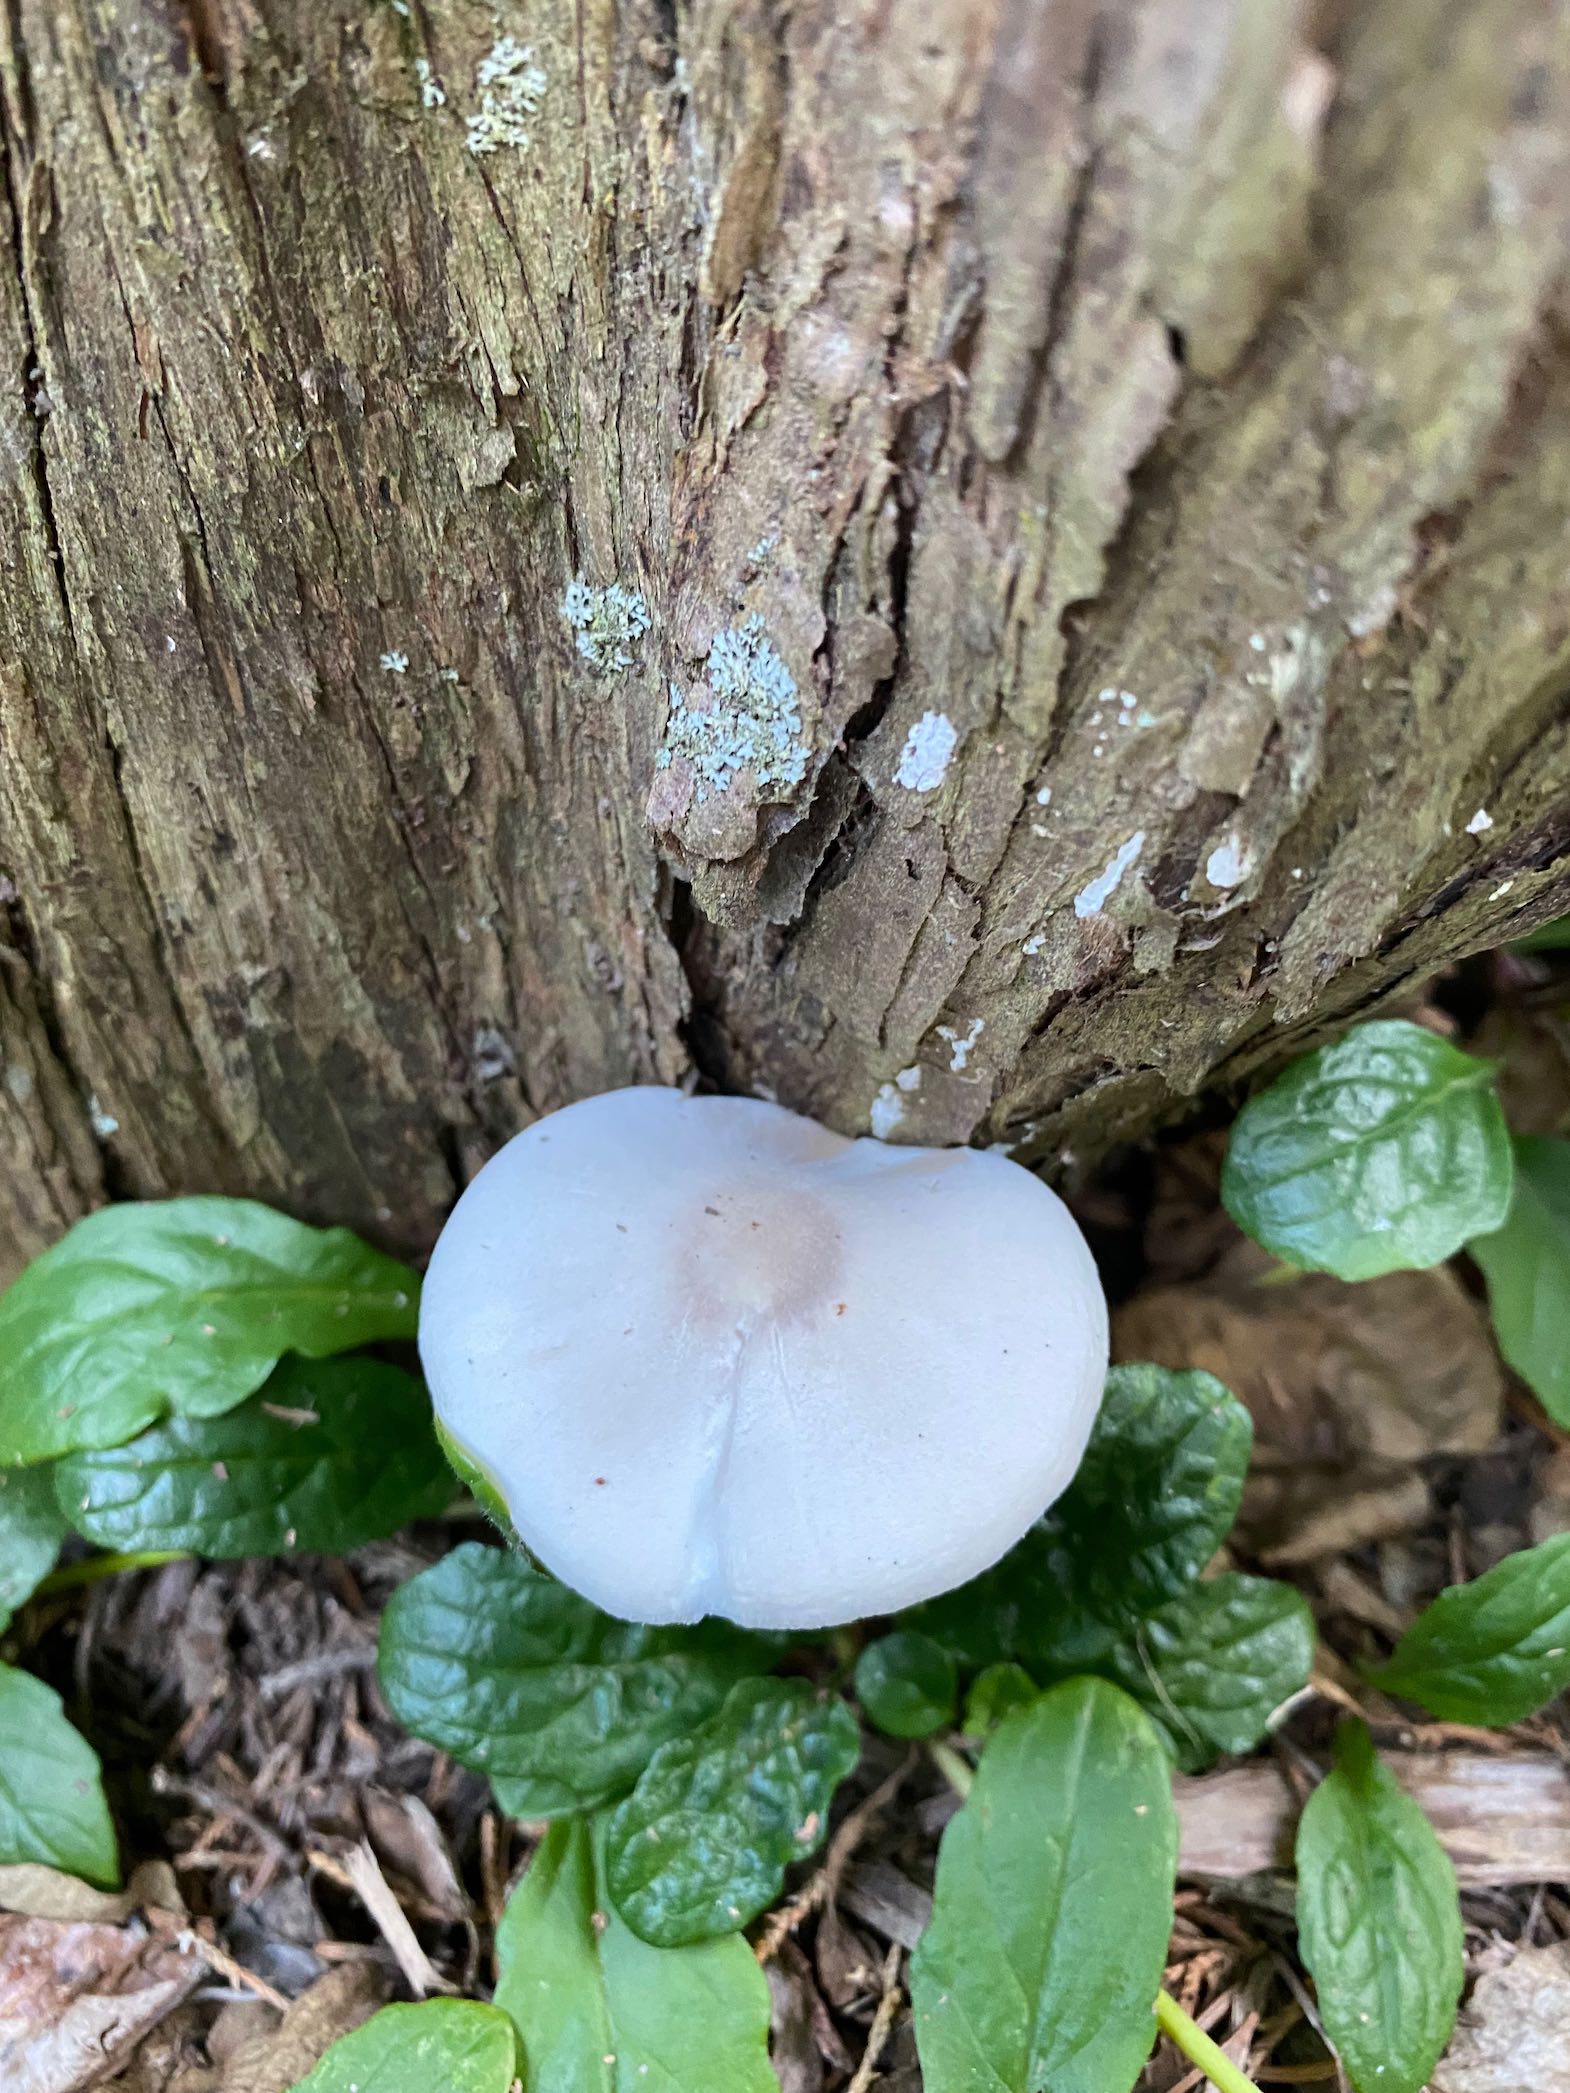 It's the weekend! Number 268, A White Fungus at the Base of a Cedar Tree